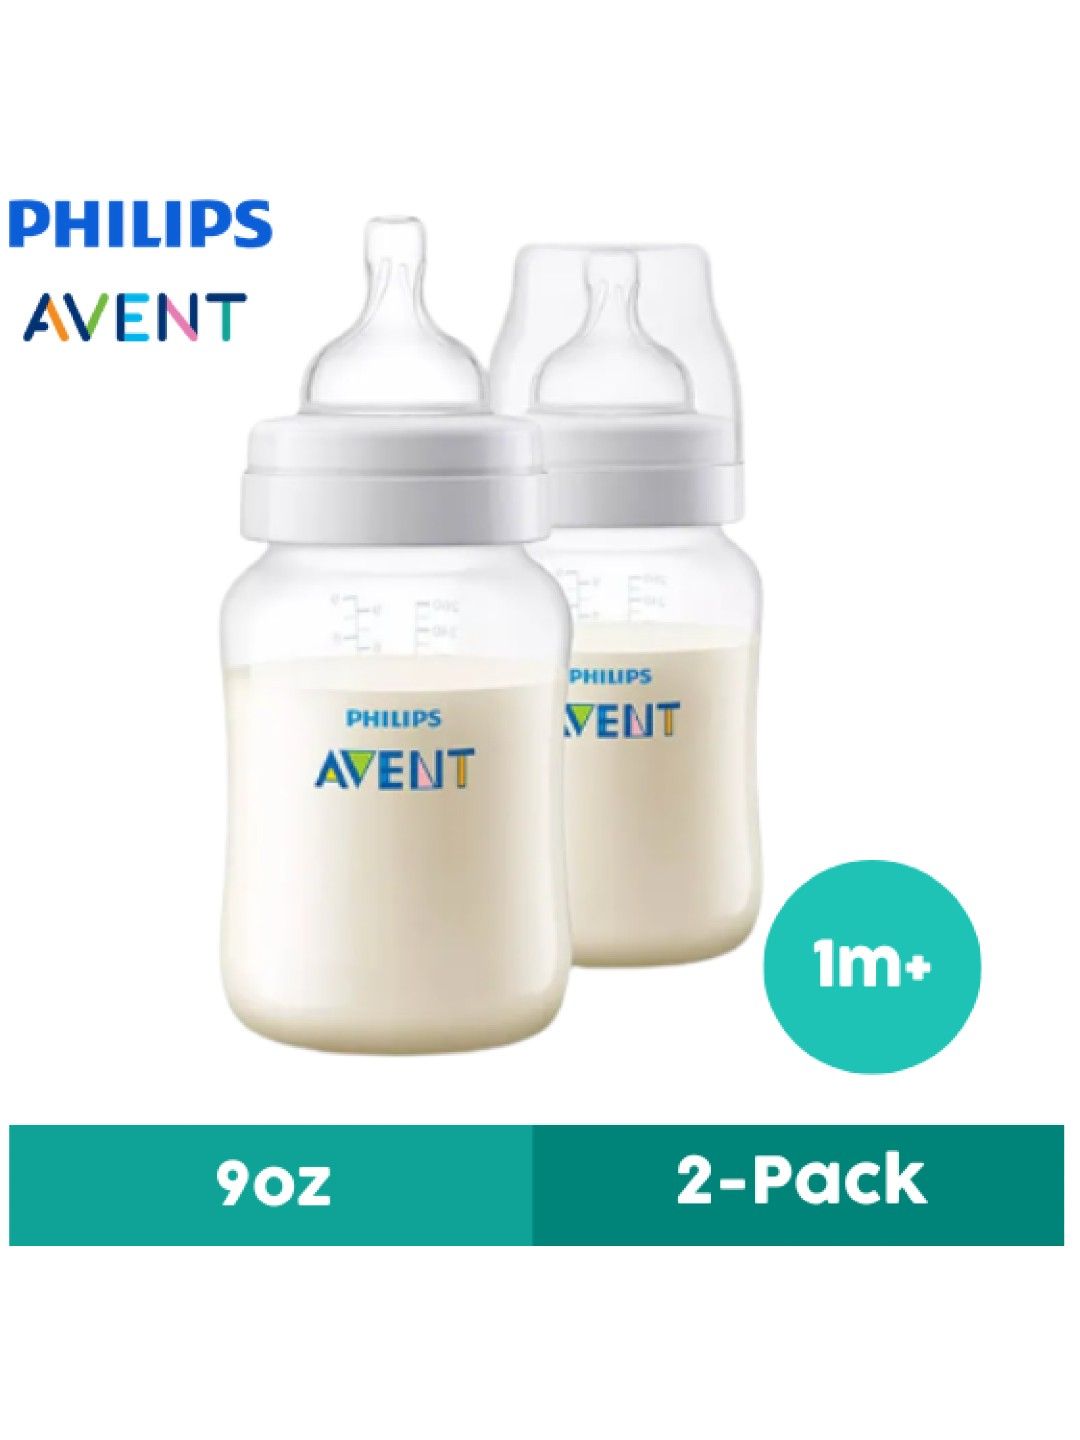 Avent Anti-colic Baby Bottle 2-pack (9oz)